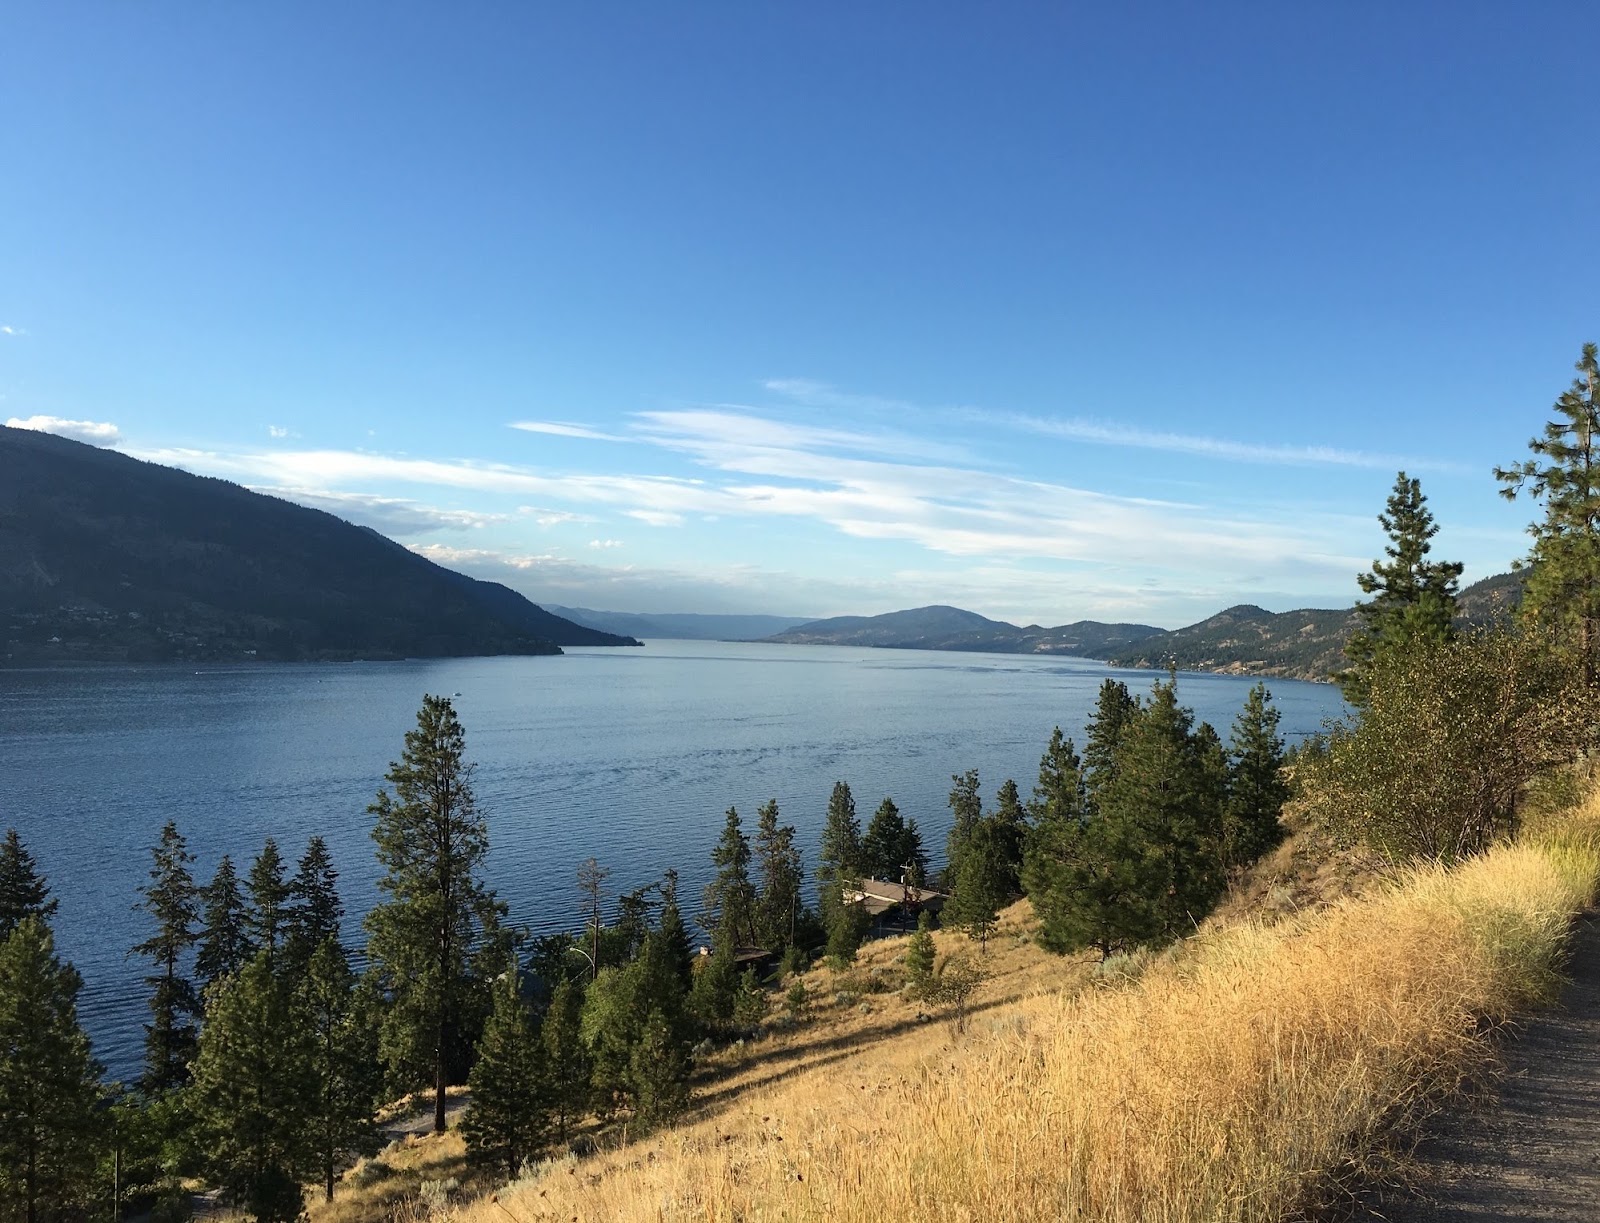 Picture of Okanagan Lake as seen from Knox Mountain with yellow grass and trees in the foreground, the lake in midground and mountains in the background under a blue sky. 